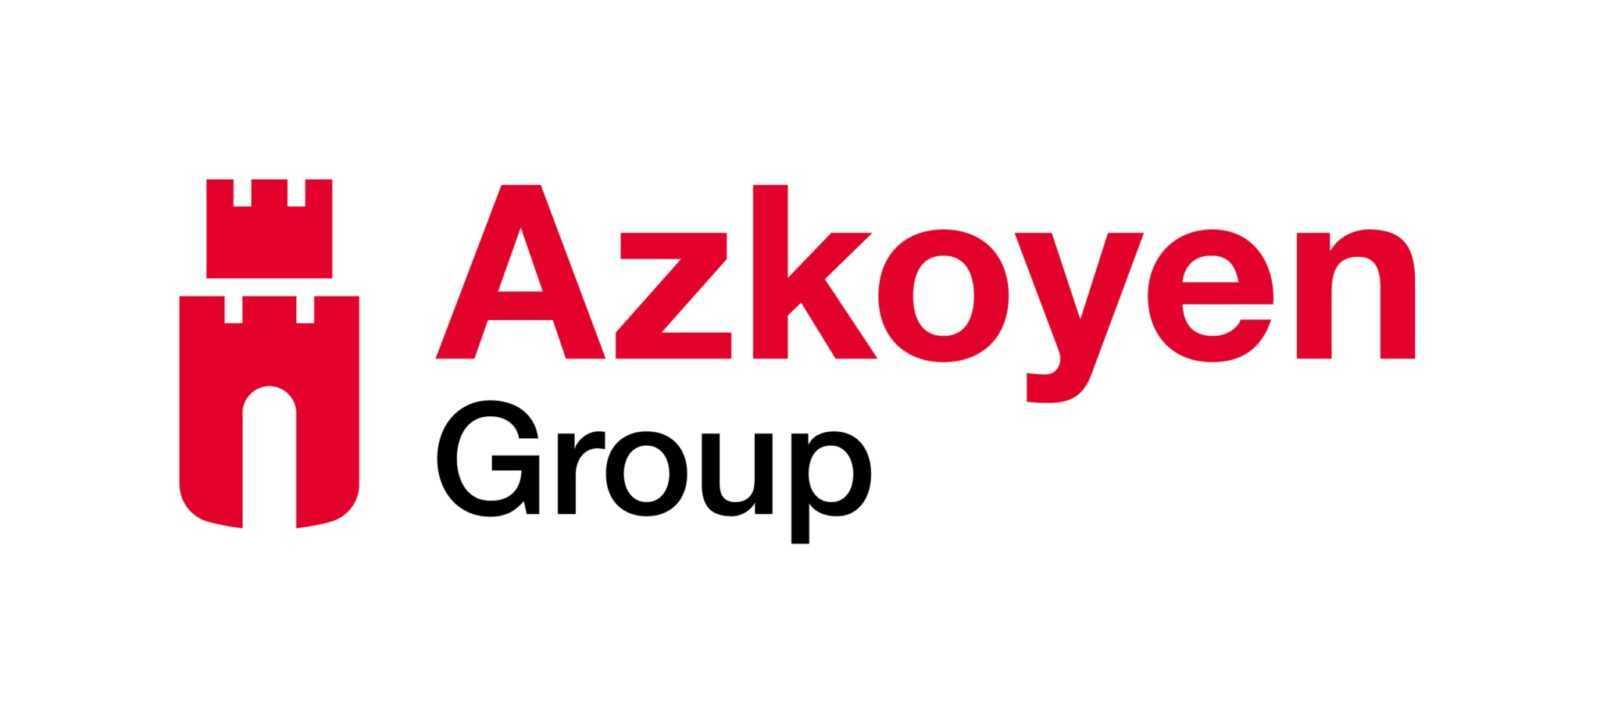 The Azkoyen Group closes the first half of the year with net profit of €5.4m